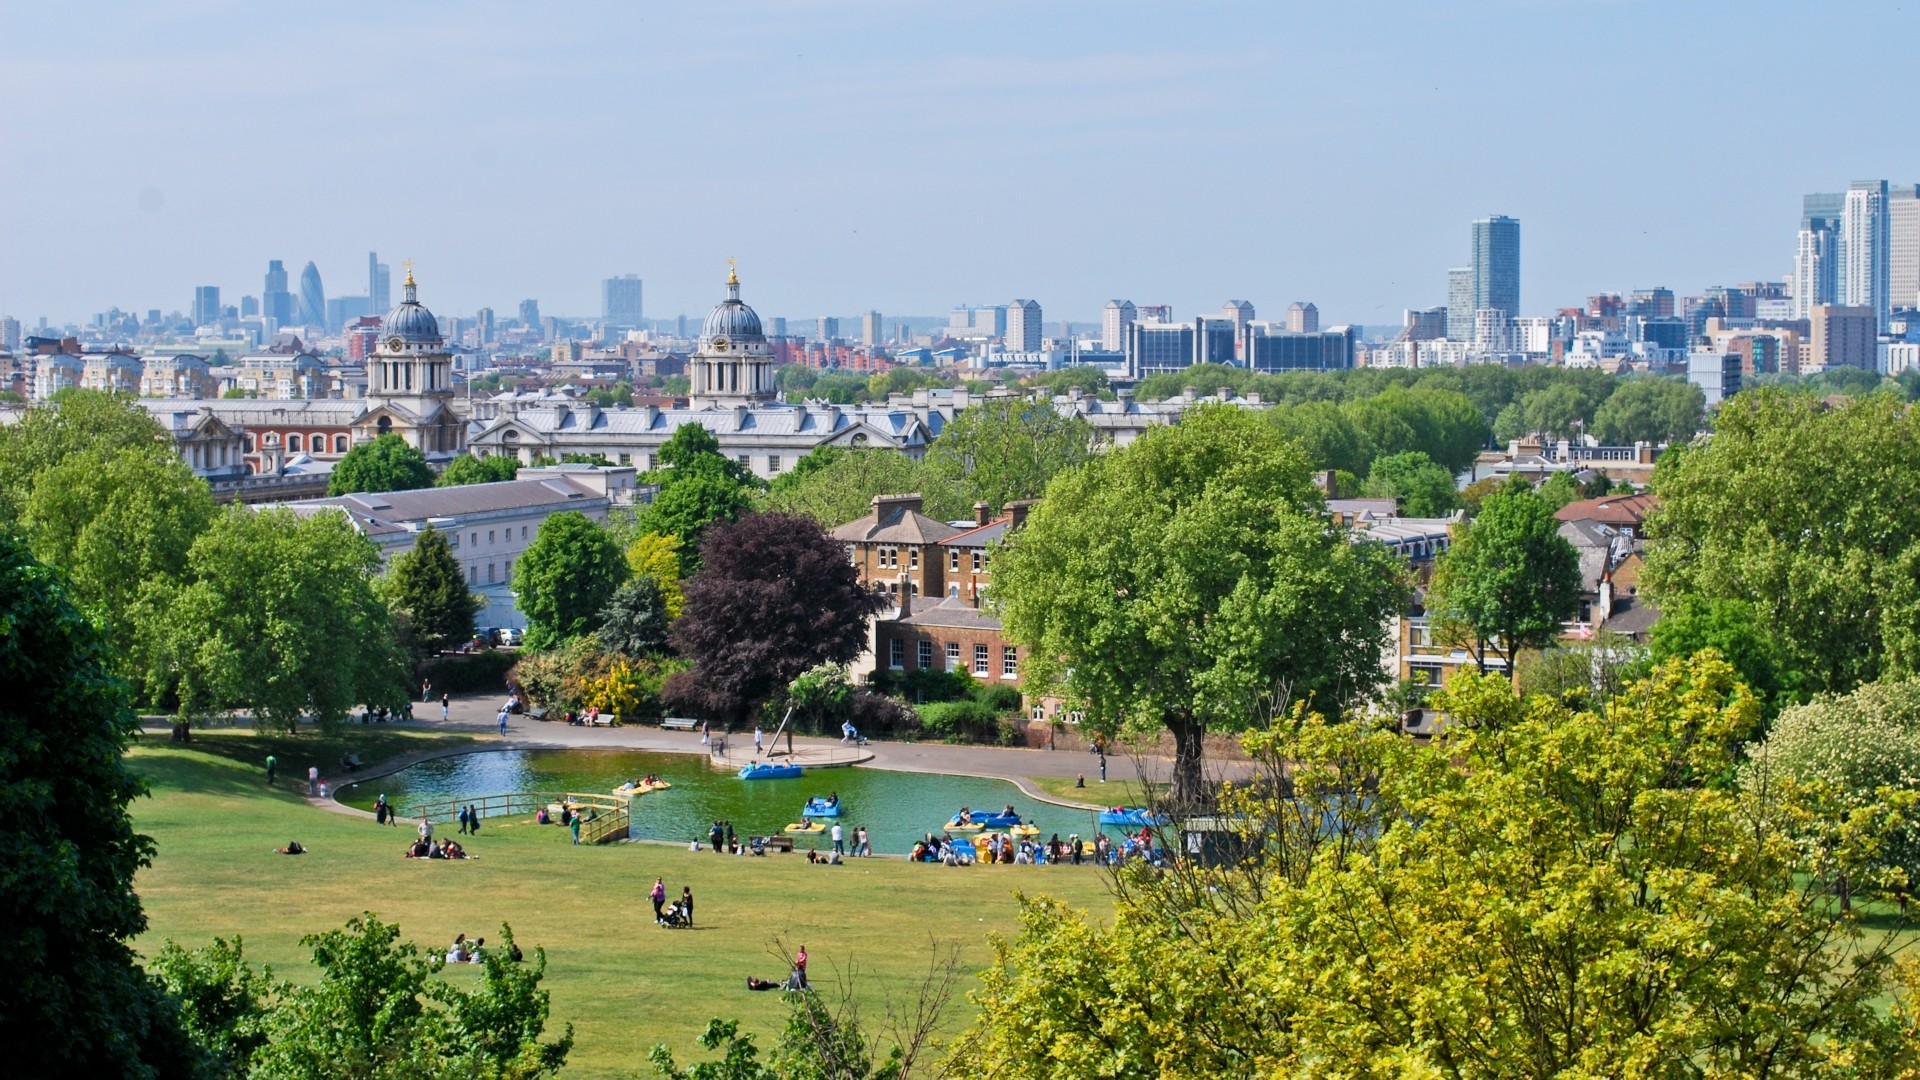 View of Greenwich Park and the London skyline.